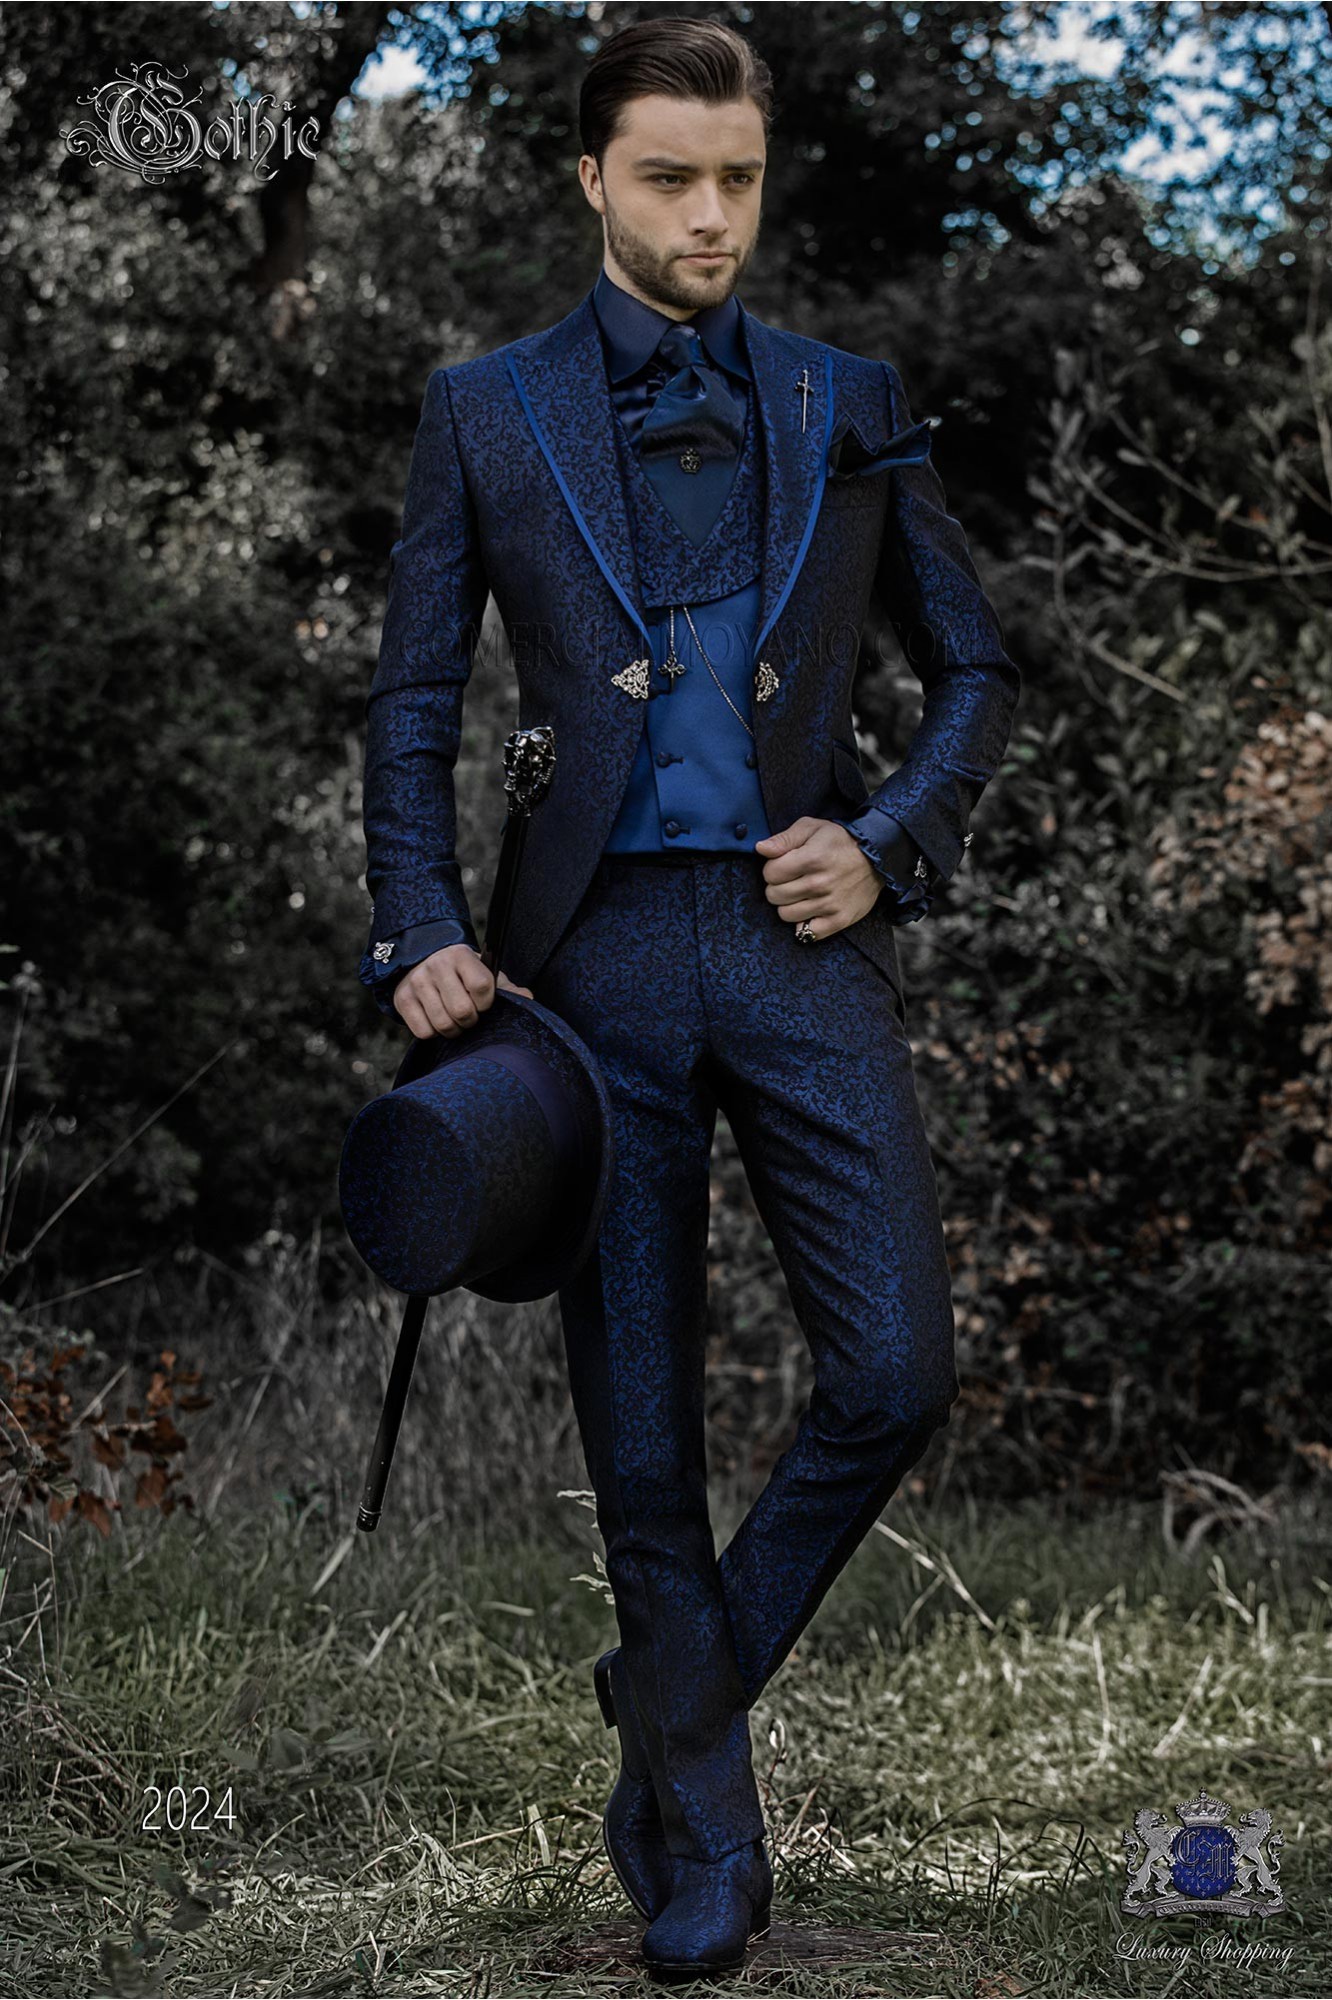 blue jacquard frock coat with pointed lapels edged with satin profile and clasp closure model 2024 Mario Moyano